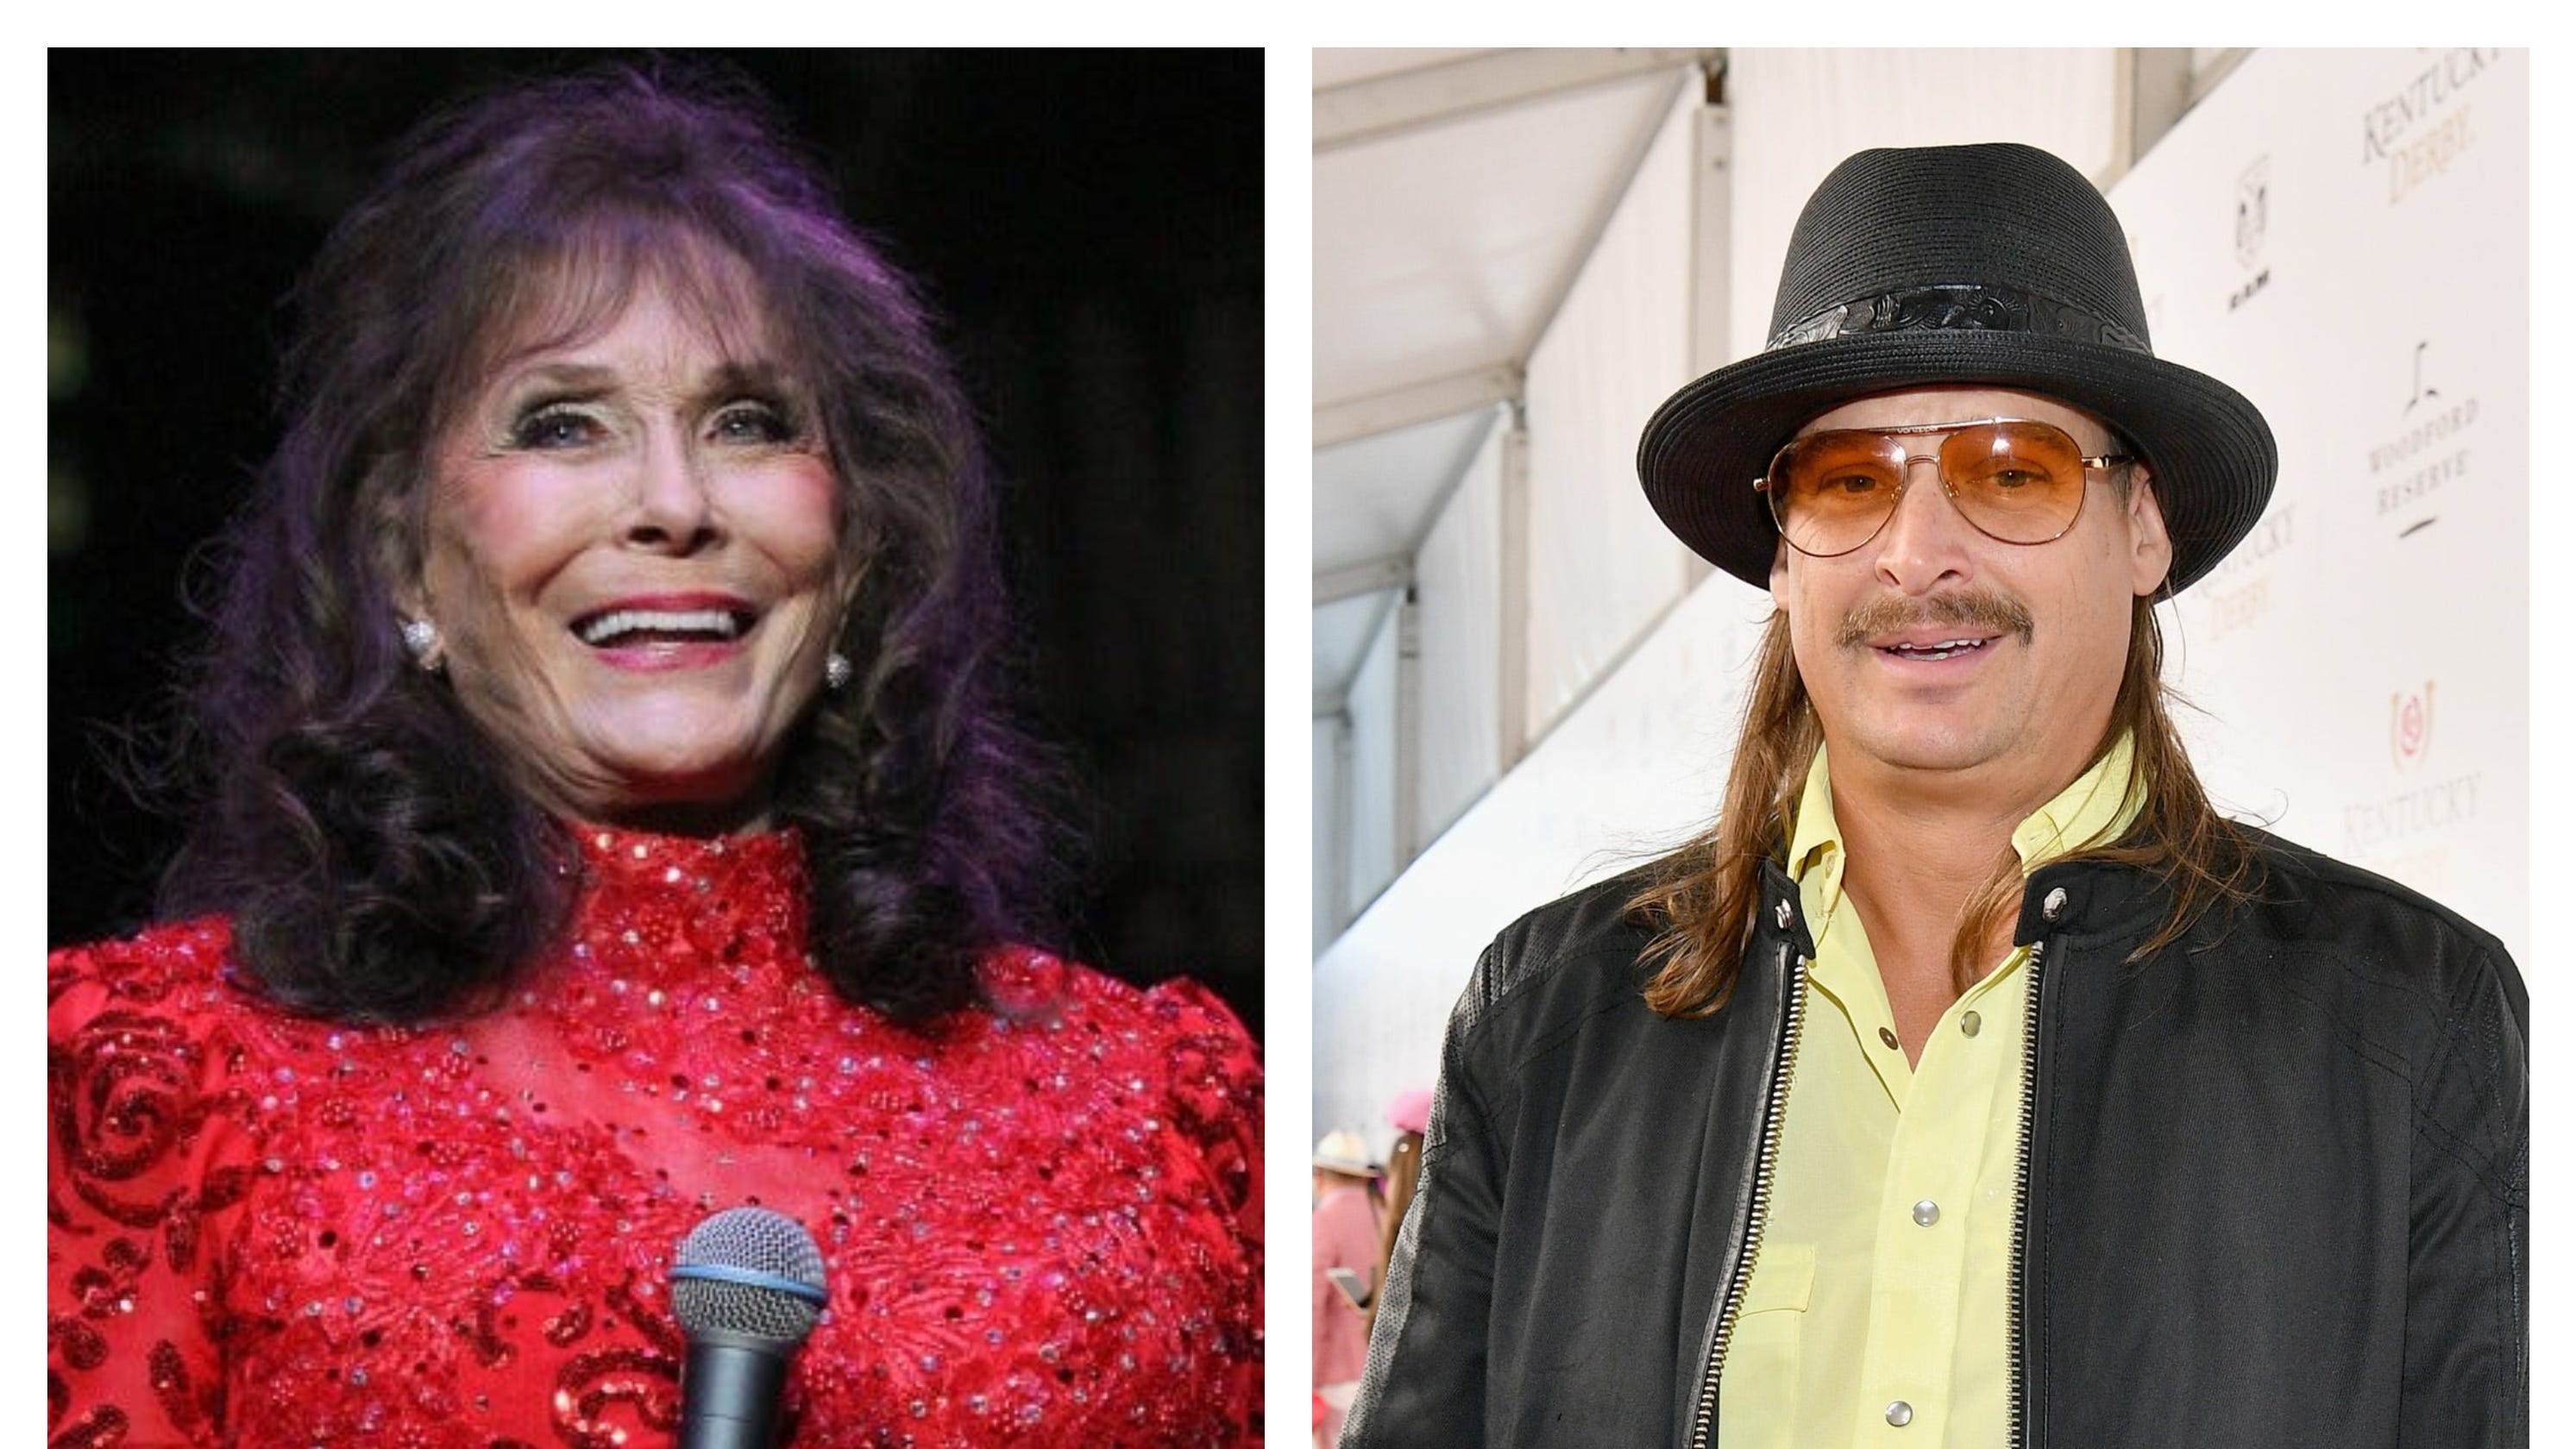 Loretta Lynn and Kid Rock got 'married' over the weekend: 'Sorry girls, he's taken now' - USA TODAY